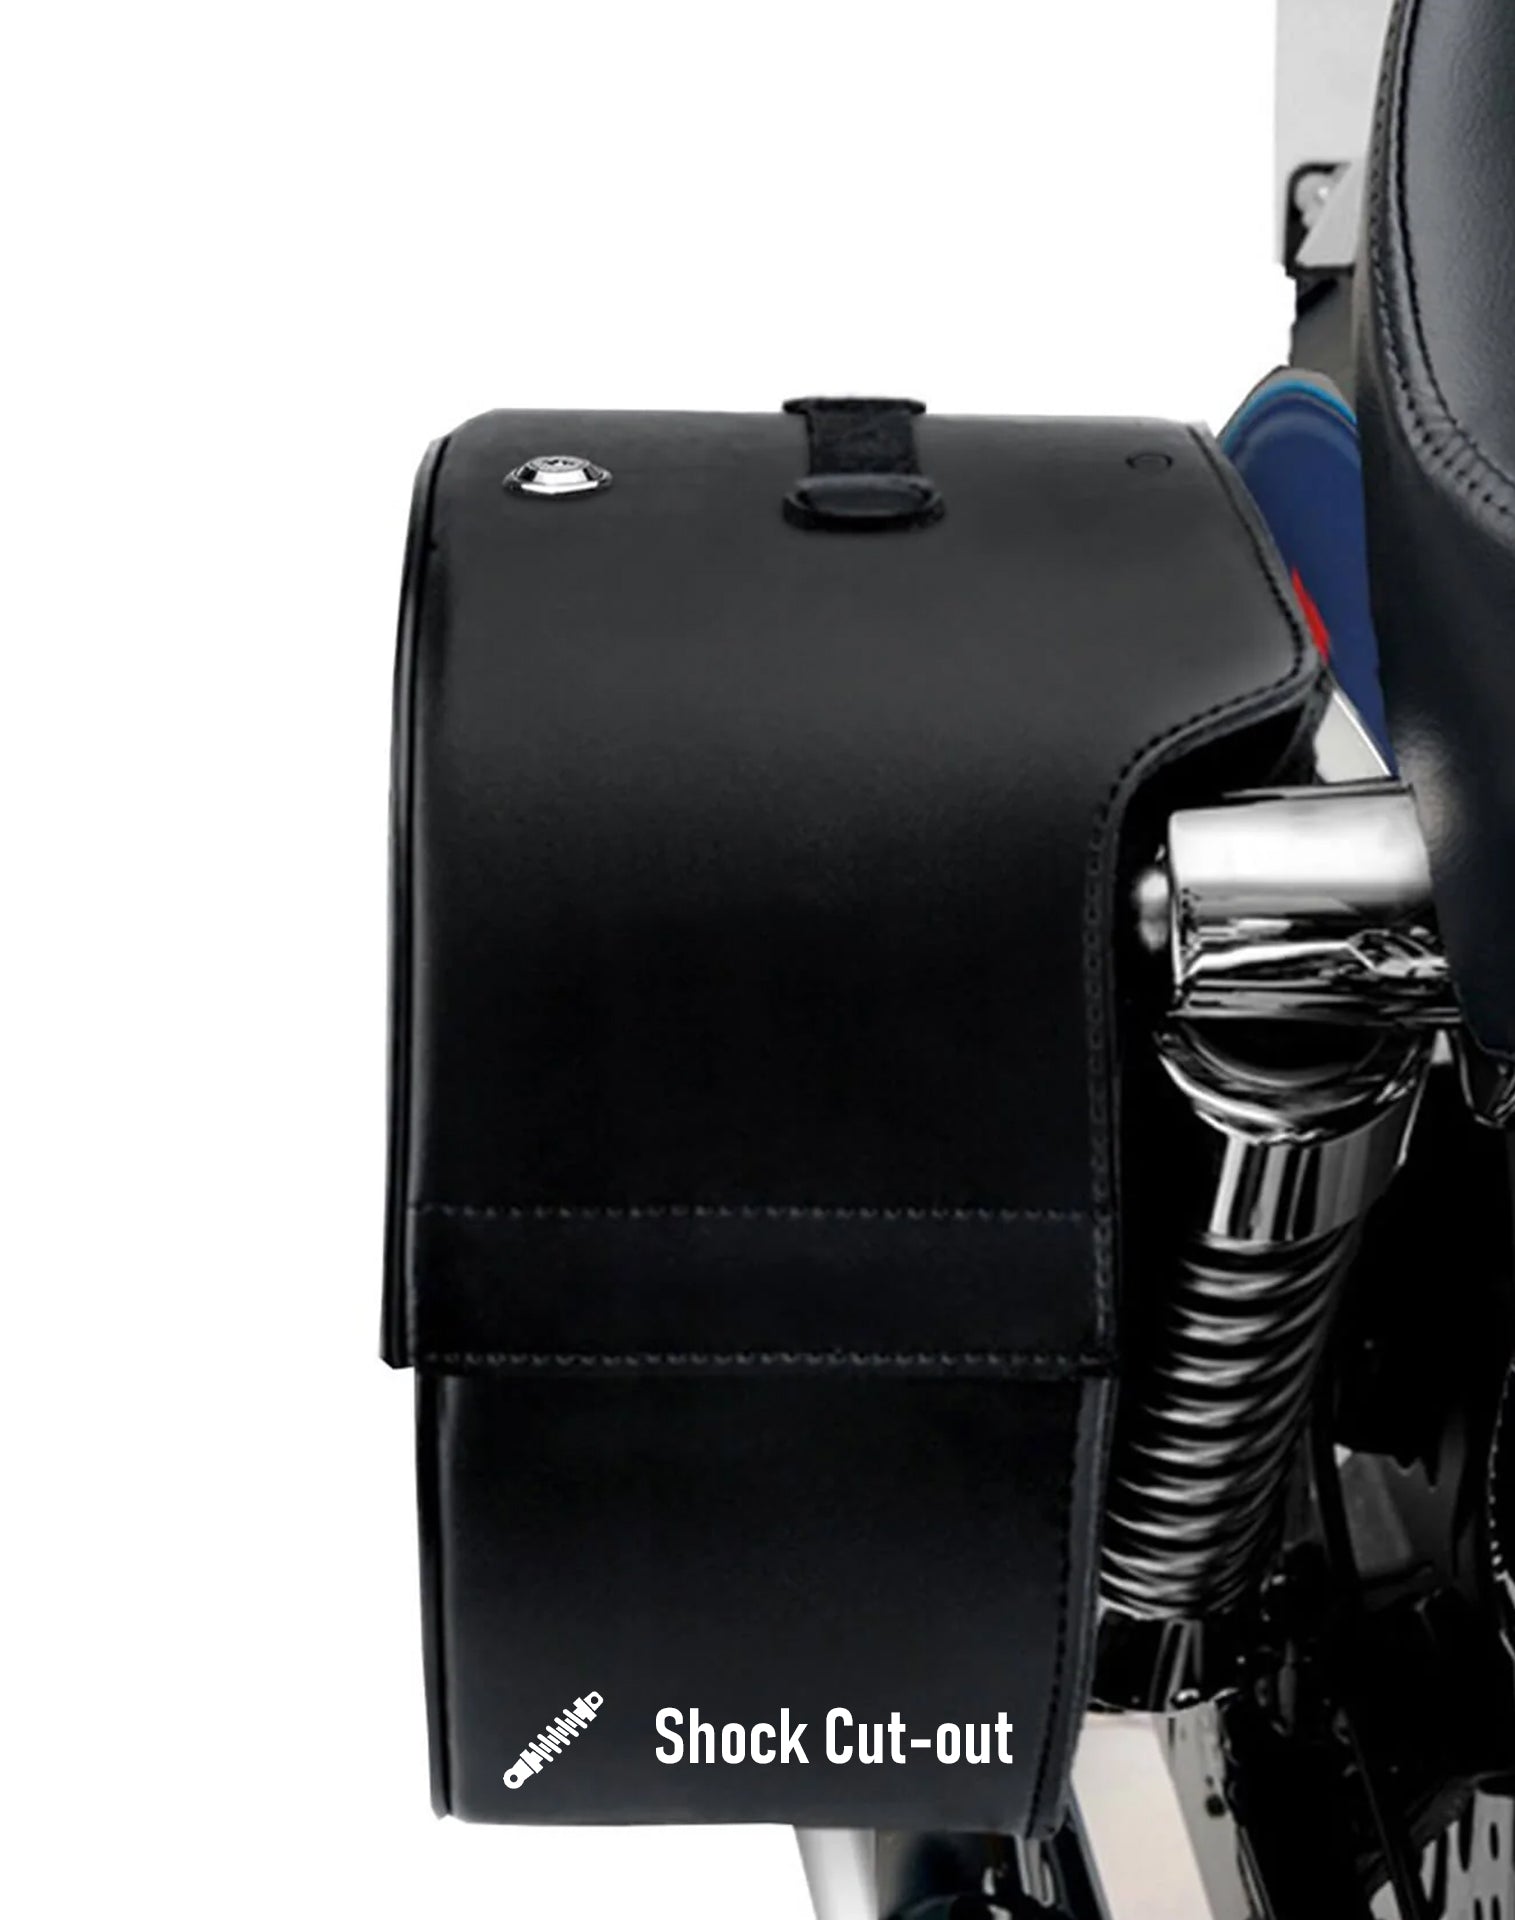 Viking Club Large Shock Cut Out Leather Motorcycle Saddlebags For Harley Sportster 1200 Custom Xl1200C Xlh1200C are Durable